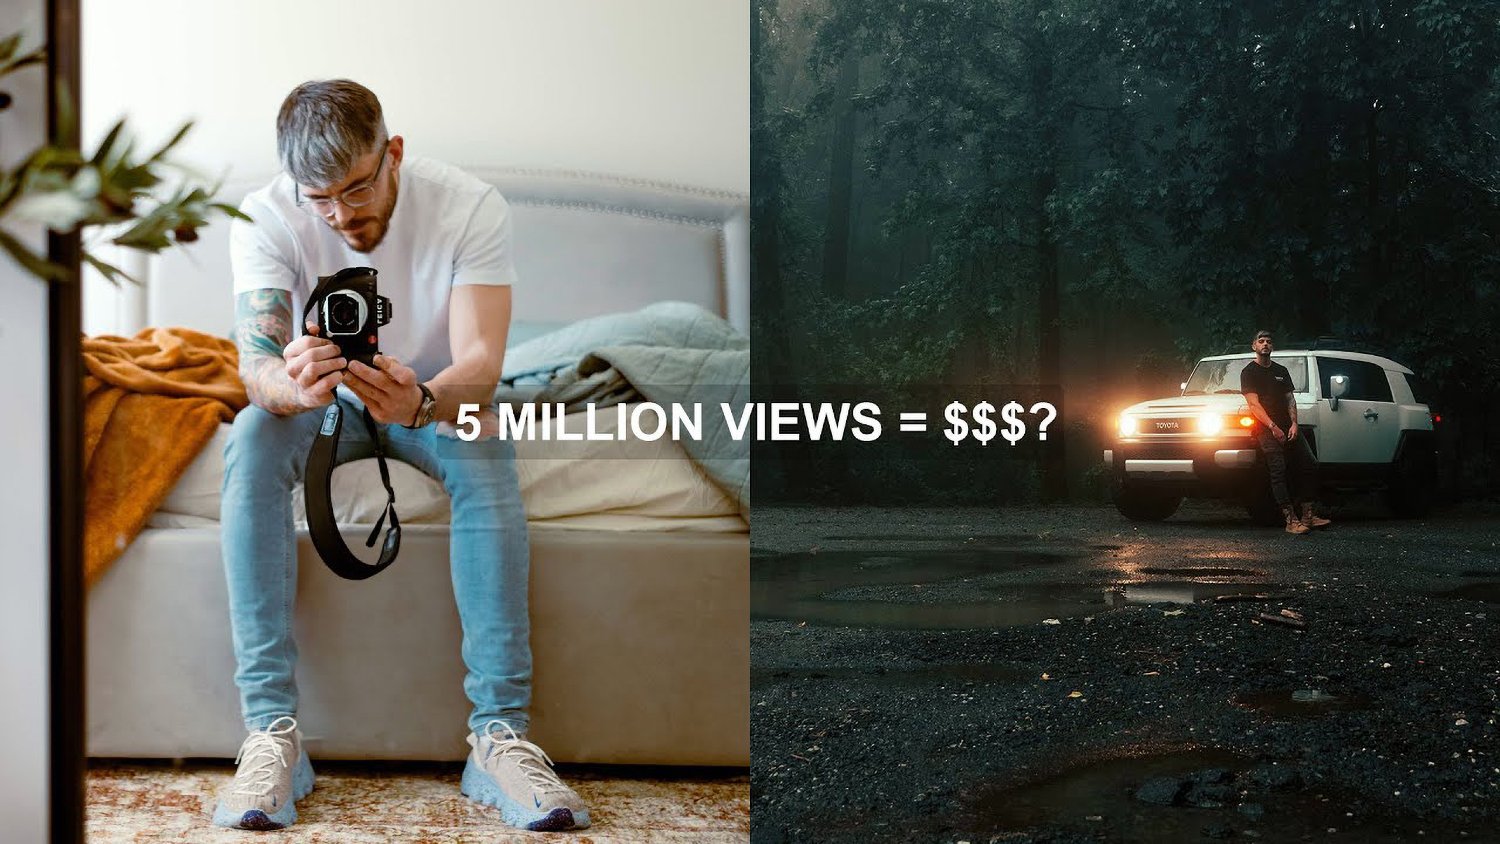 How Much Can a Photographer Make on YouTube?